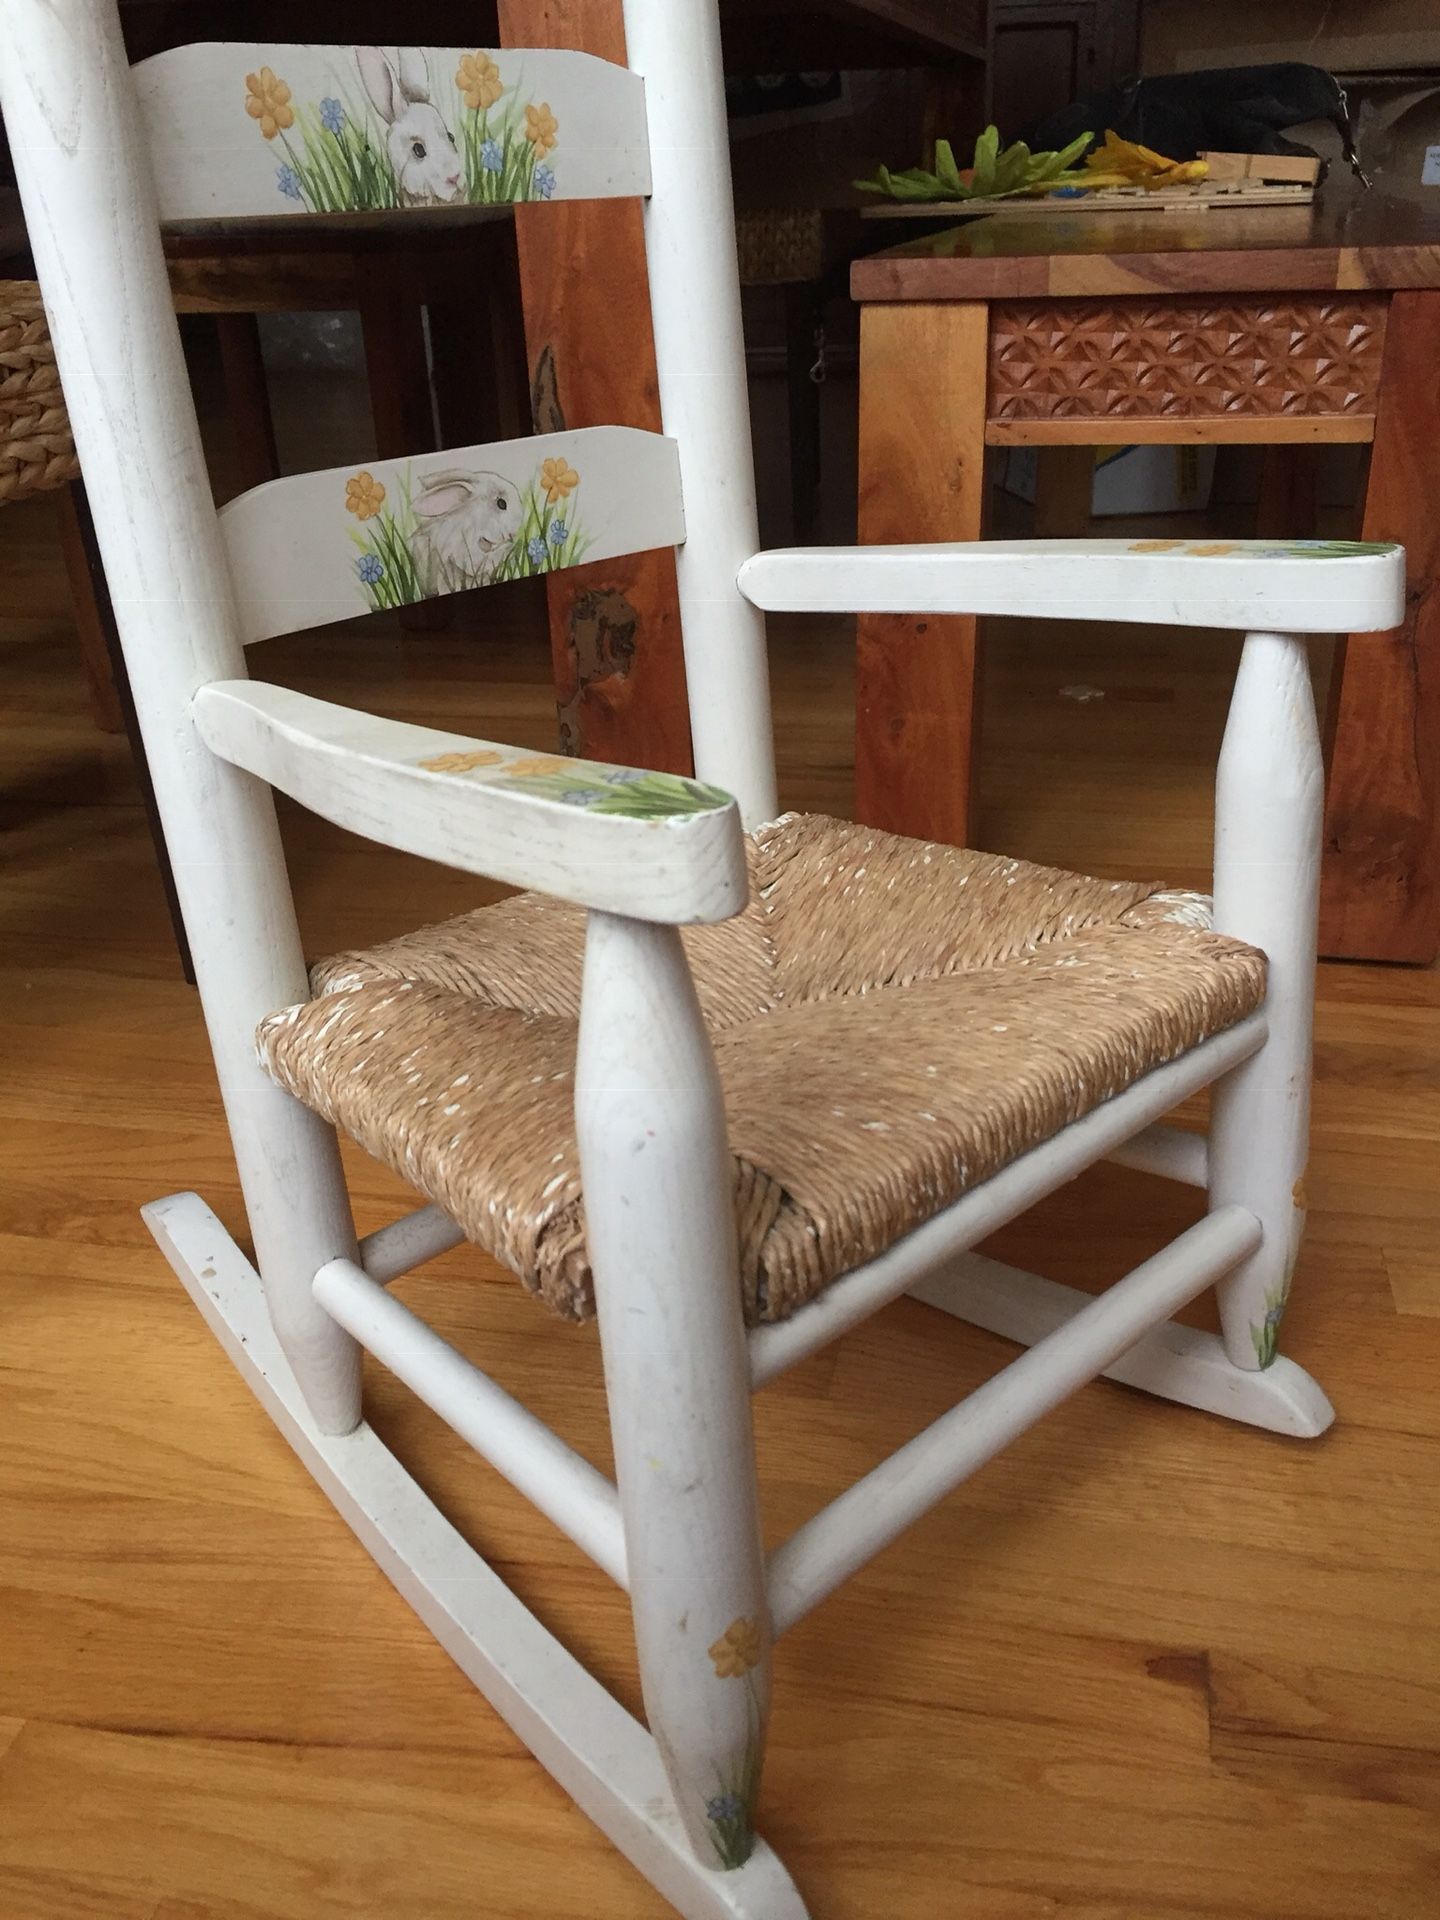 Hand painted wooden child’s rocking chair